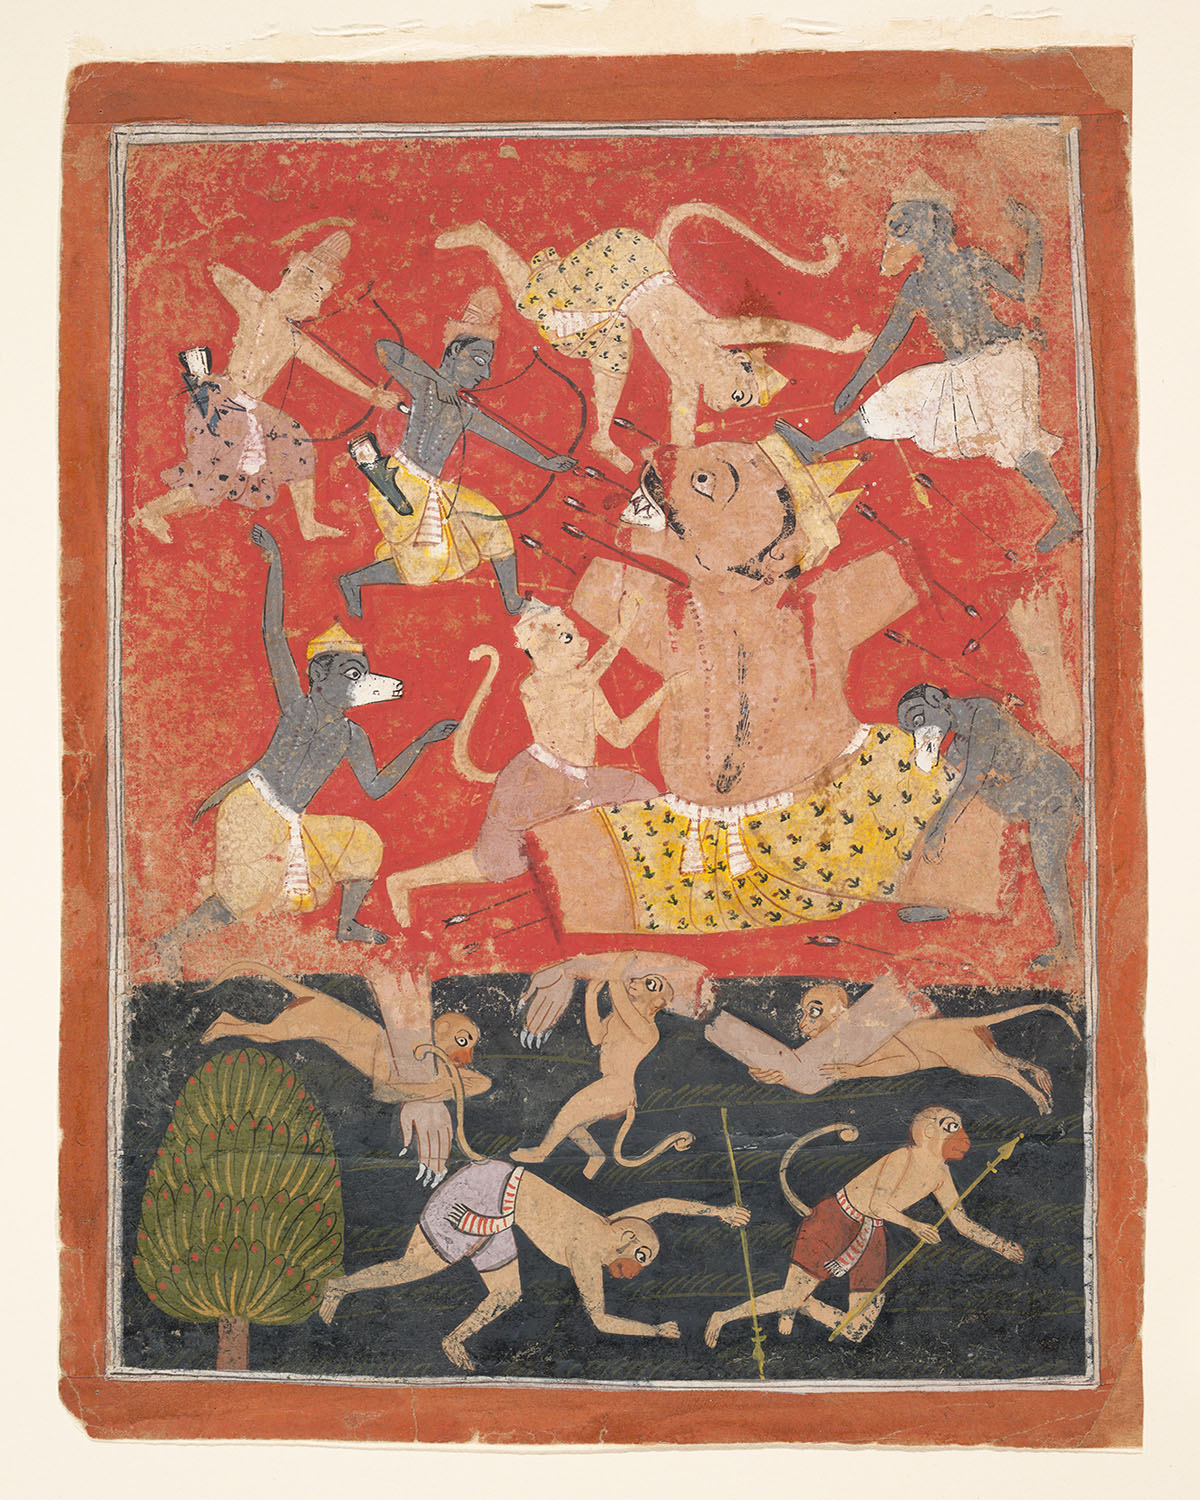 A painting with Kumbhakarna in the centre with his limbs cut off, surrounded by Rama, Lakshmana and the monkey army.